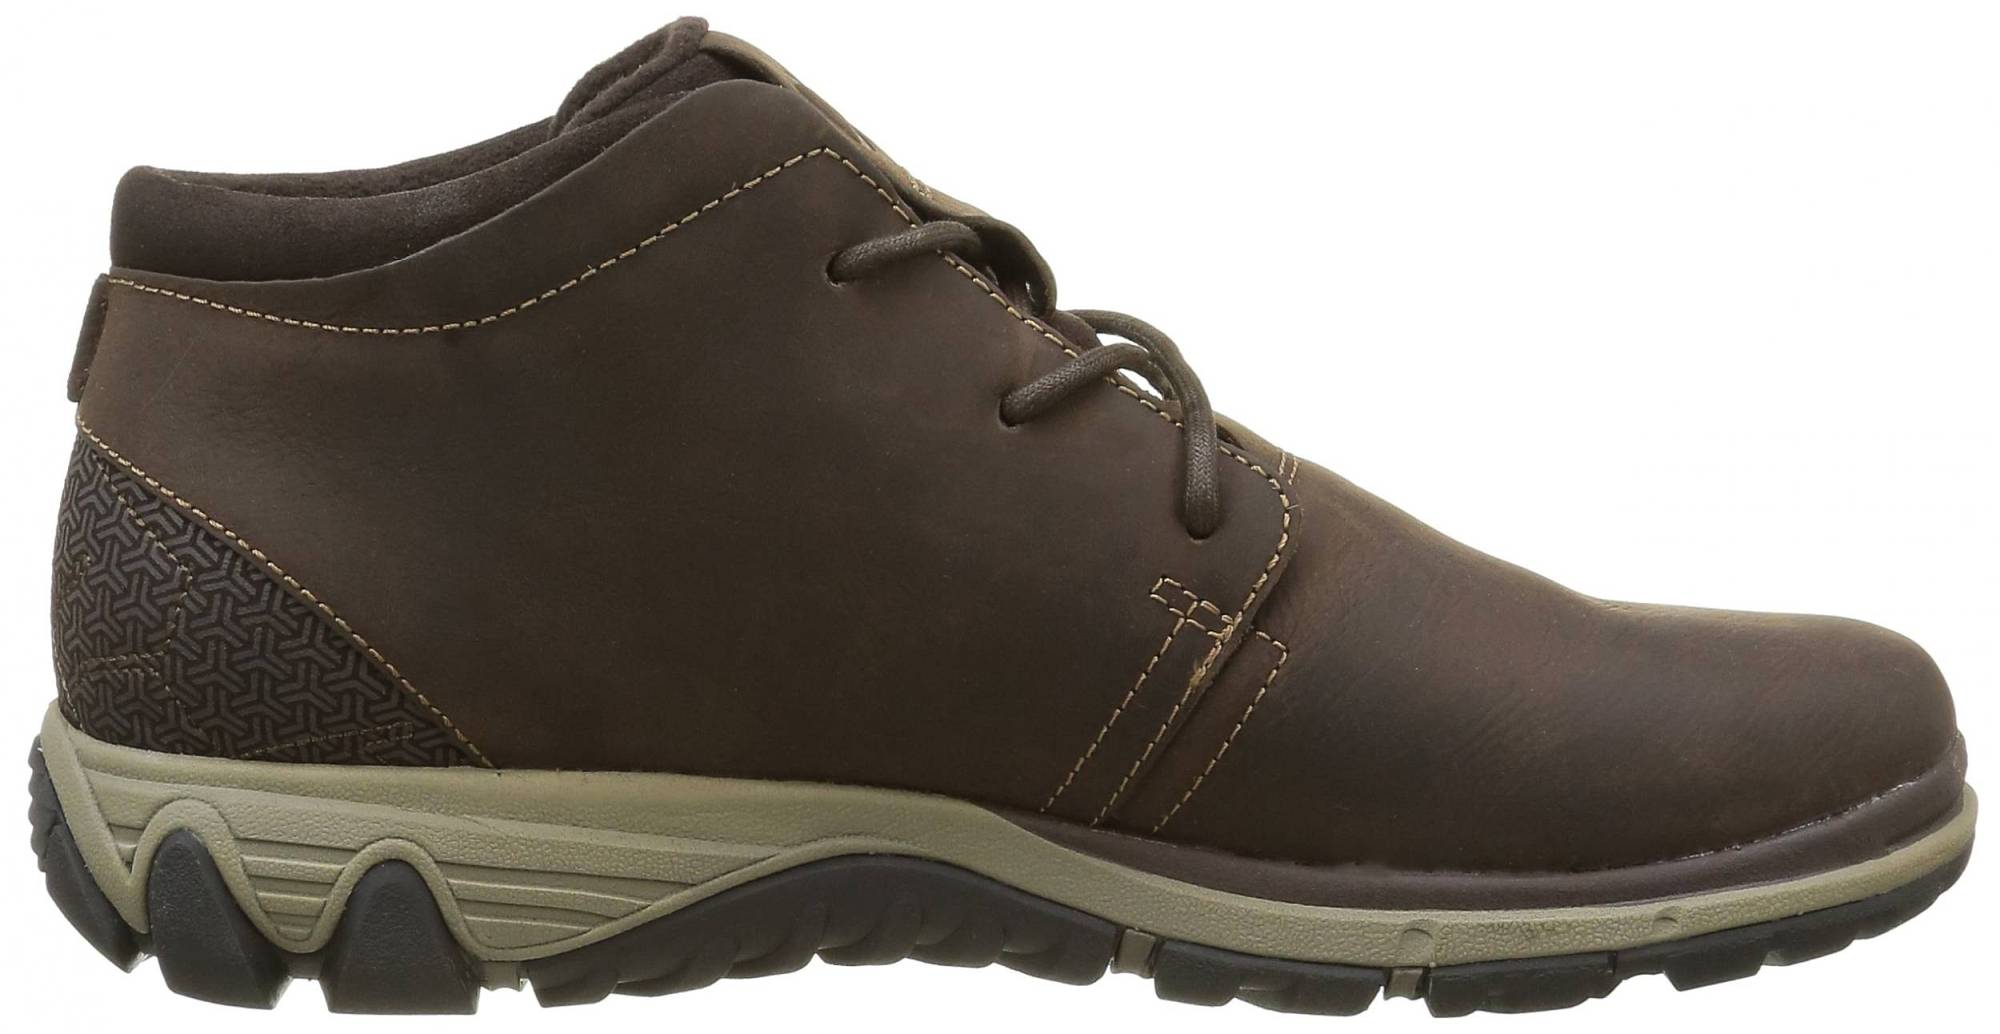 Merrell All Out Blazer Chukka North – Shoes Reviews & Reasons To Buy